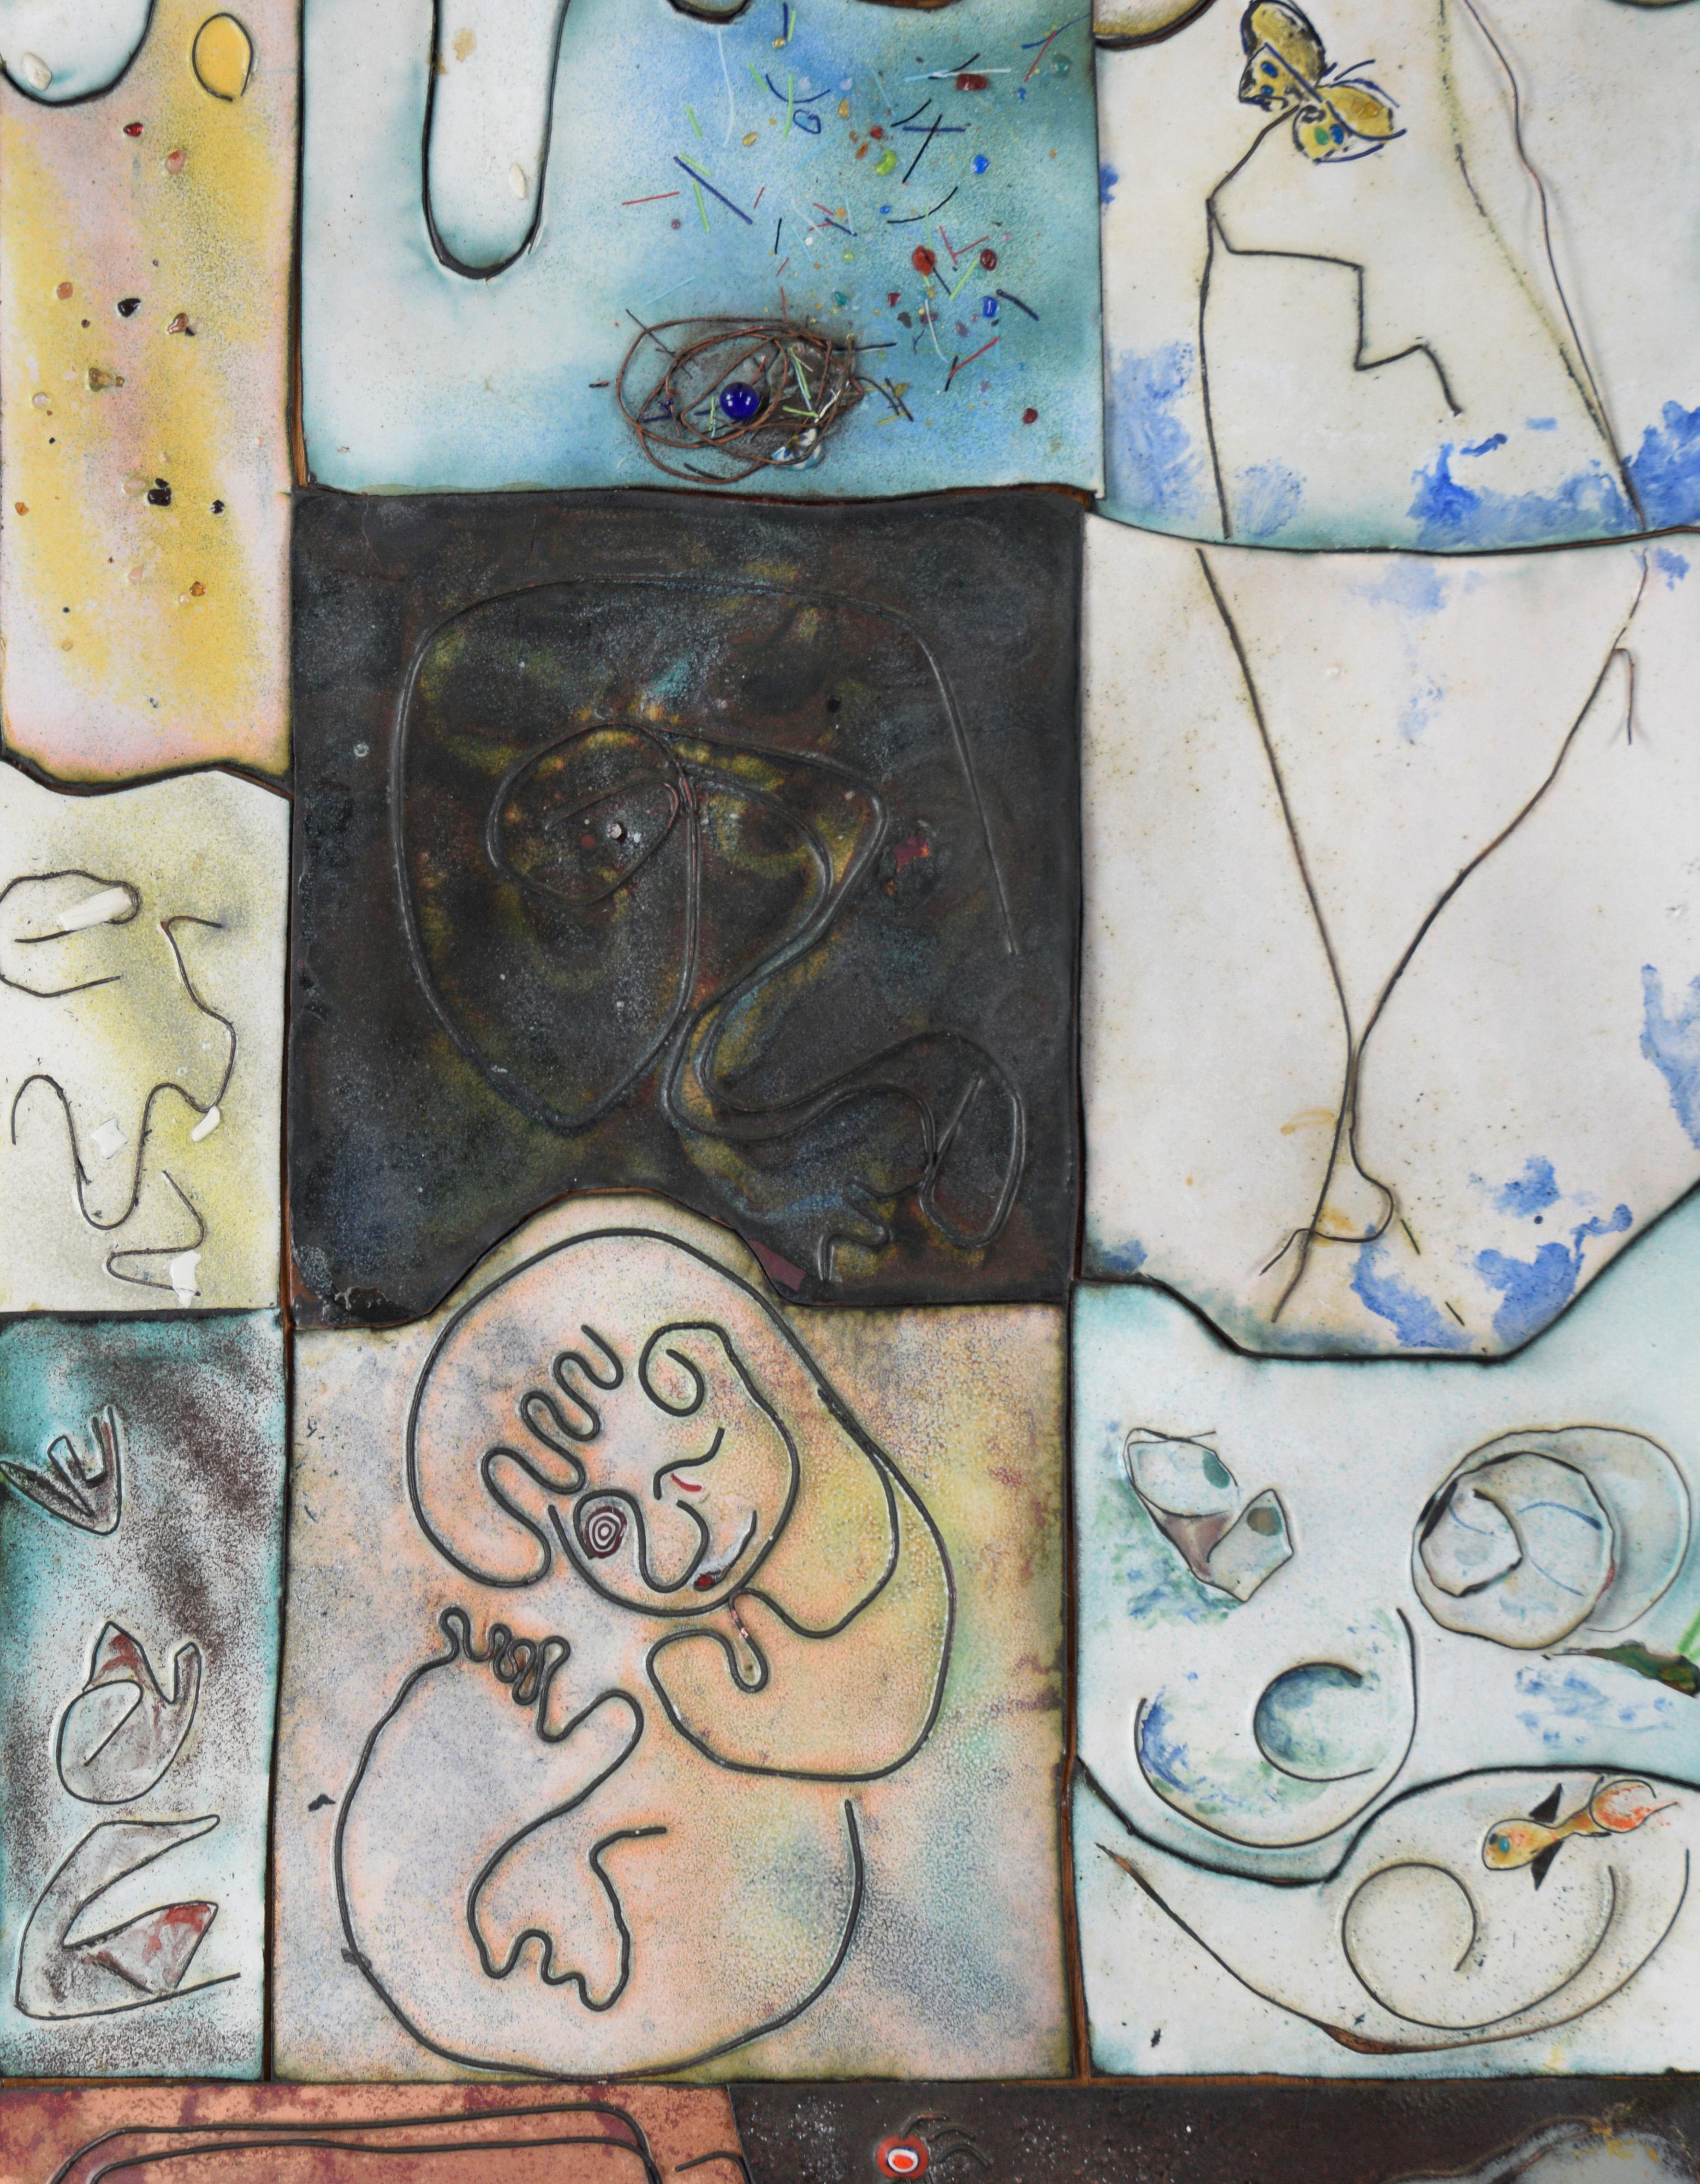 Multifaceted Copper Enamel Tiles Abstract by N.G. Bloome
Enameled Copper panels 